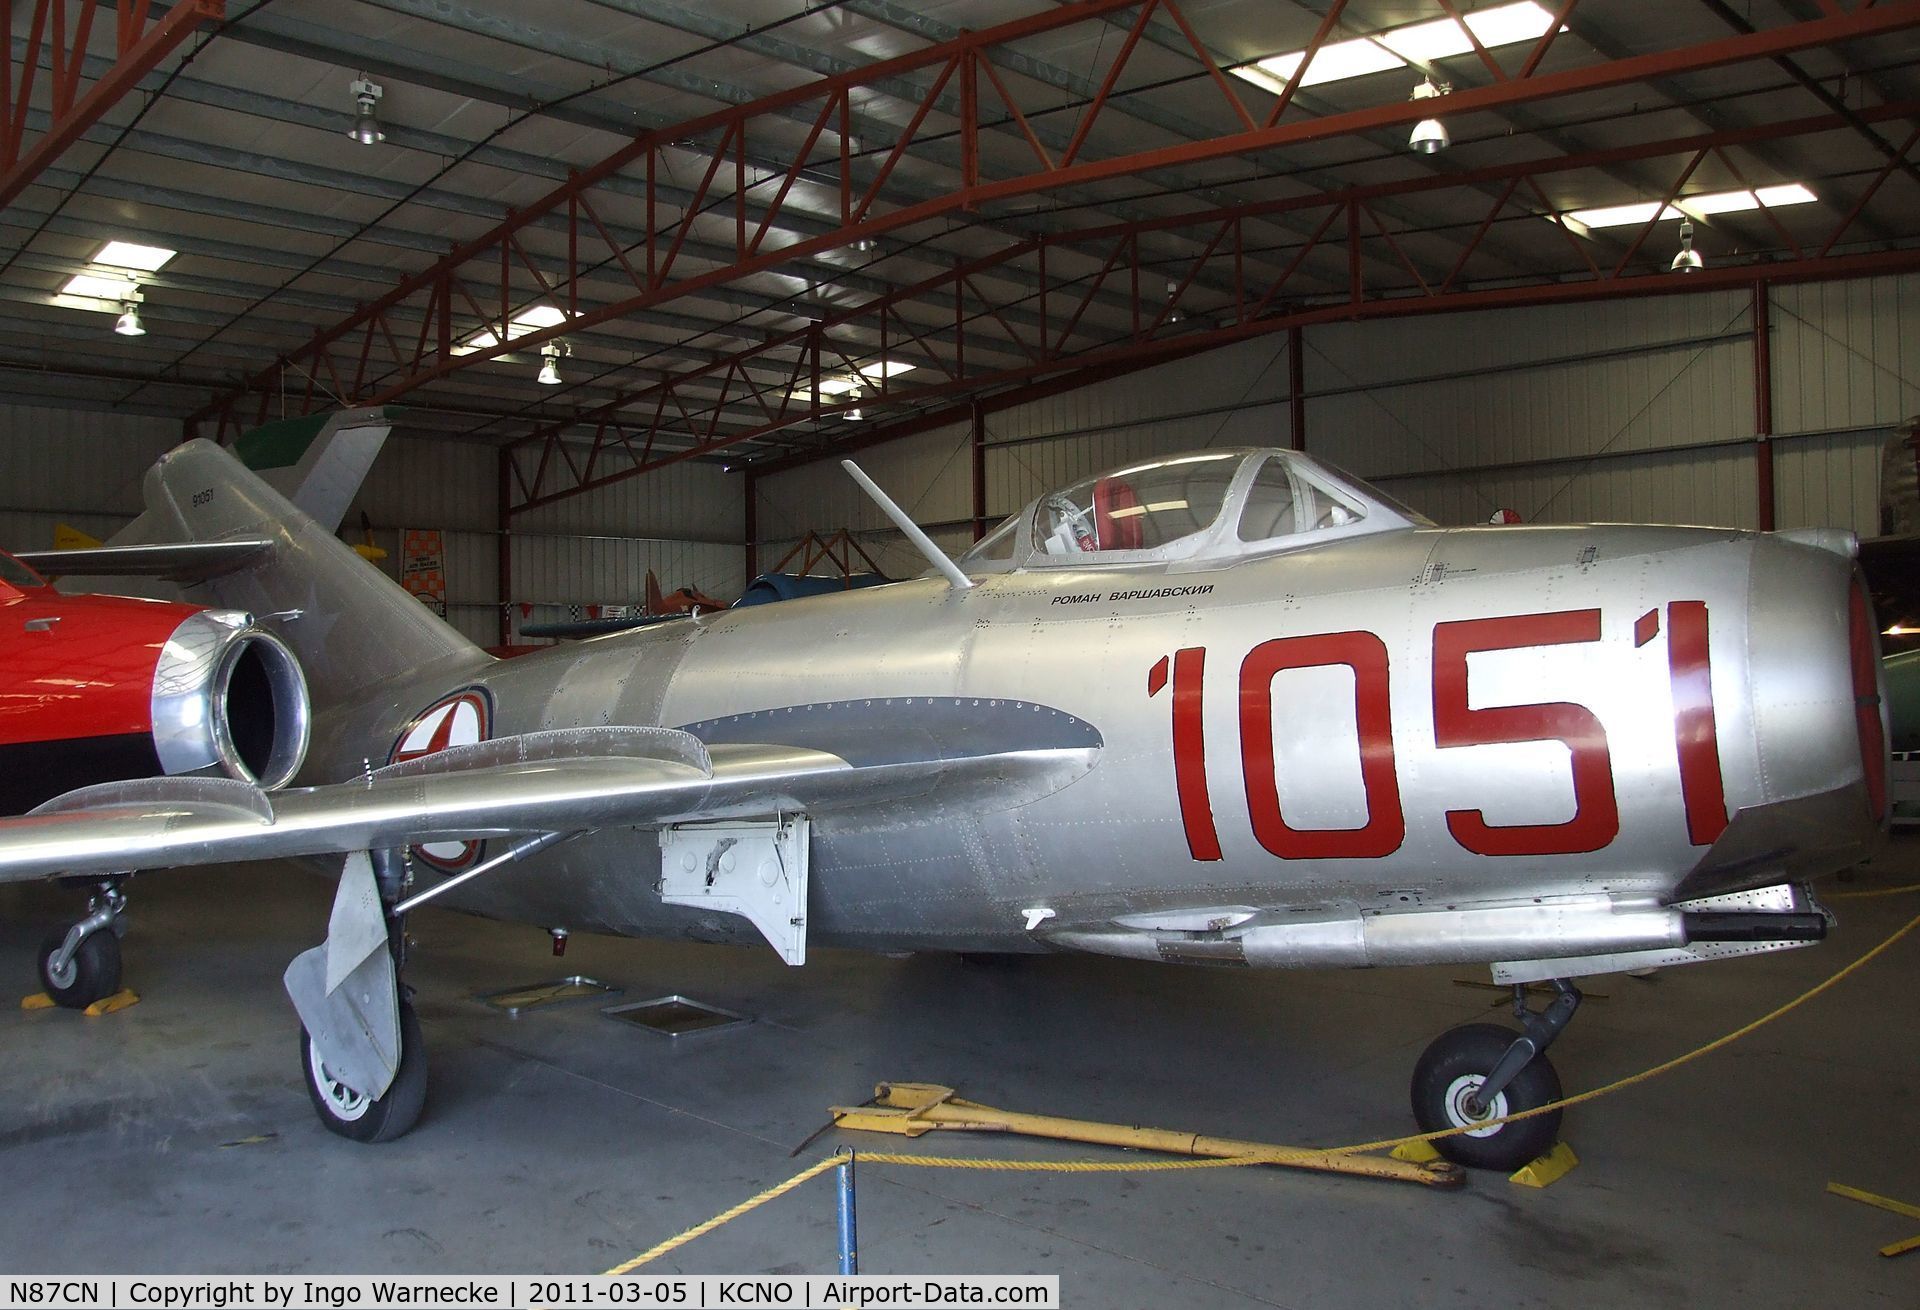 N87CN, Mikoyan-Gurevich MiG-15 C/N 910-51, Mikoyan i Gurevich MiG-15 FAGOT at the Planes of Fame Air Museum, Chino CA